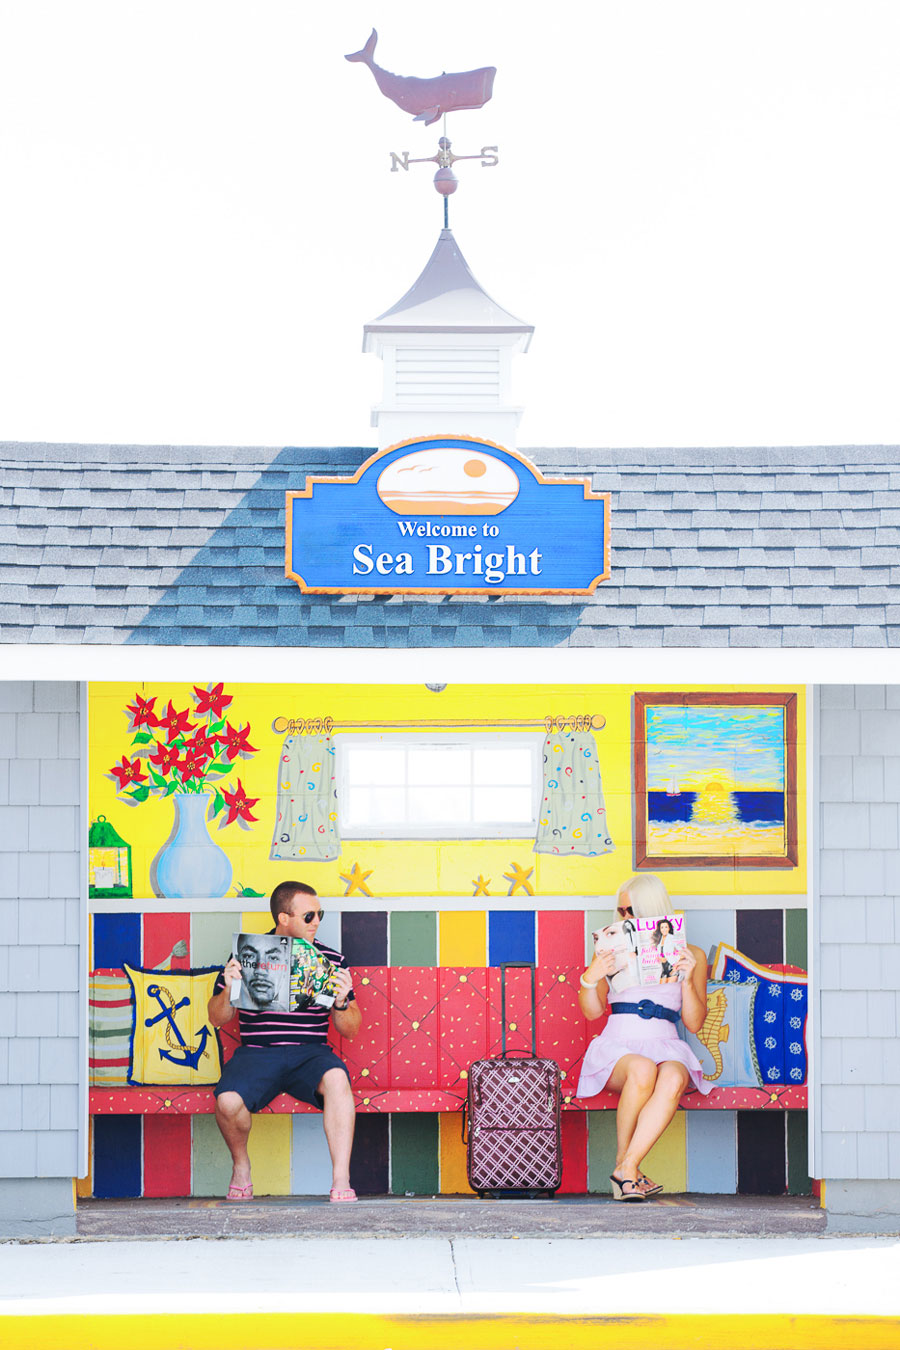 Asbury Park Sets The Tone For This Playful Summer Time Engagement Session At The Jersey Shore